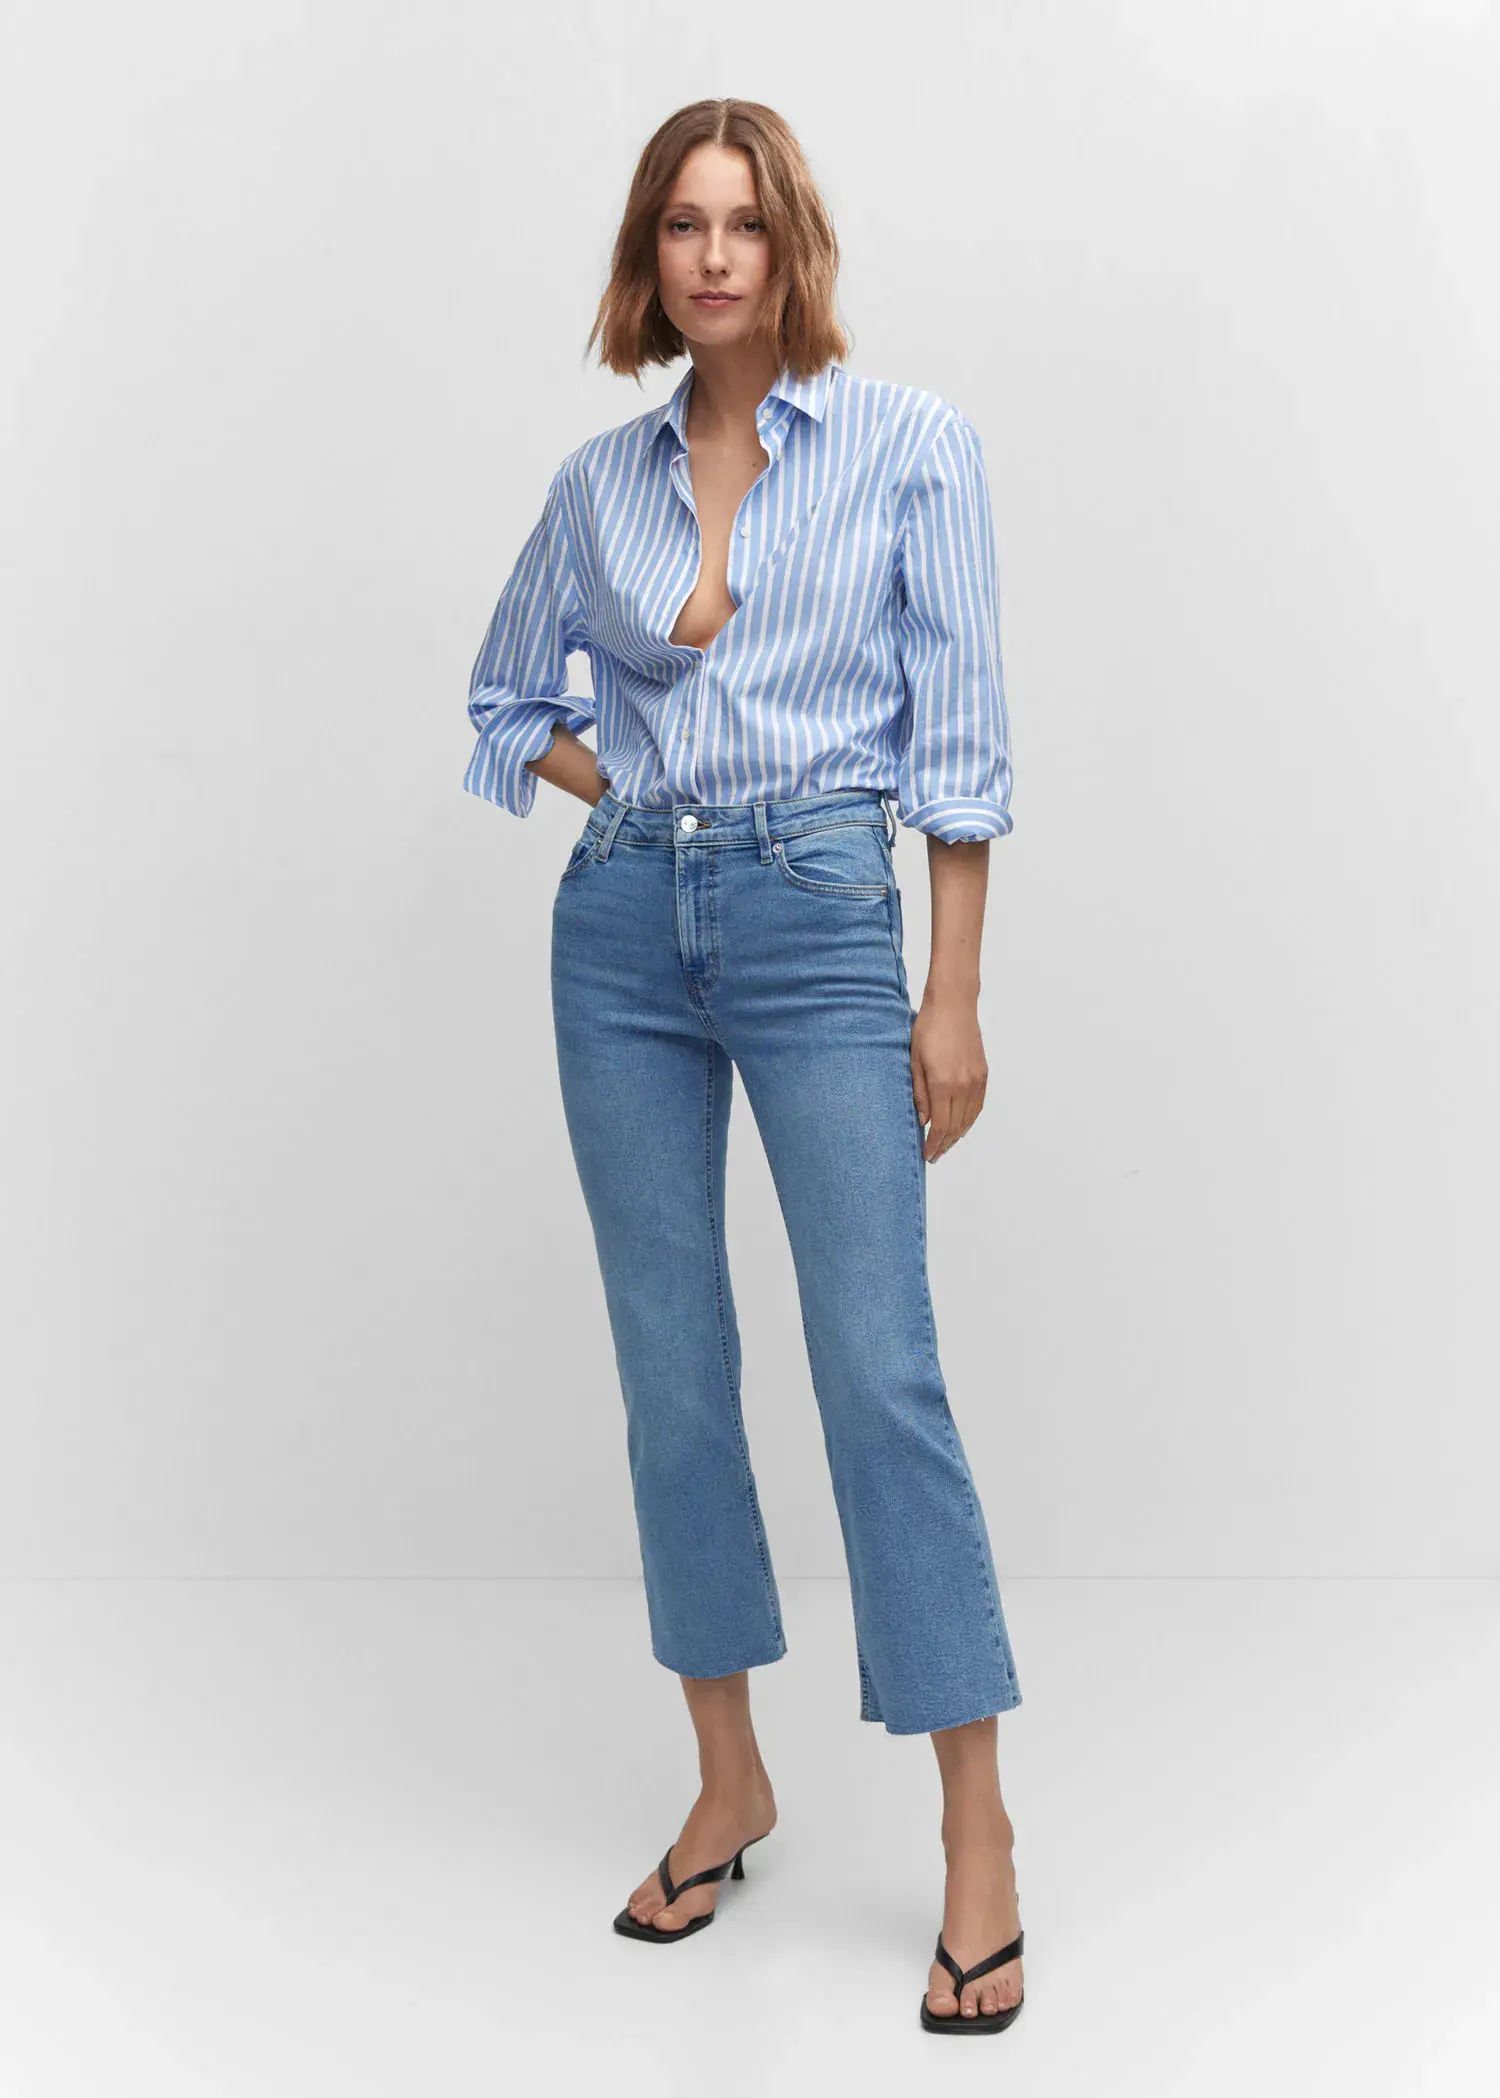 Mango Crop flared jeans. a woman in a striped shirt and jeans. 